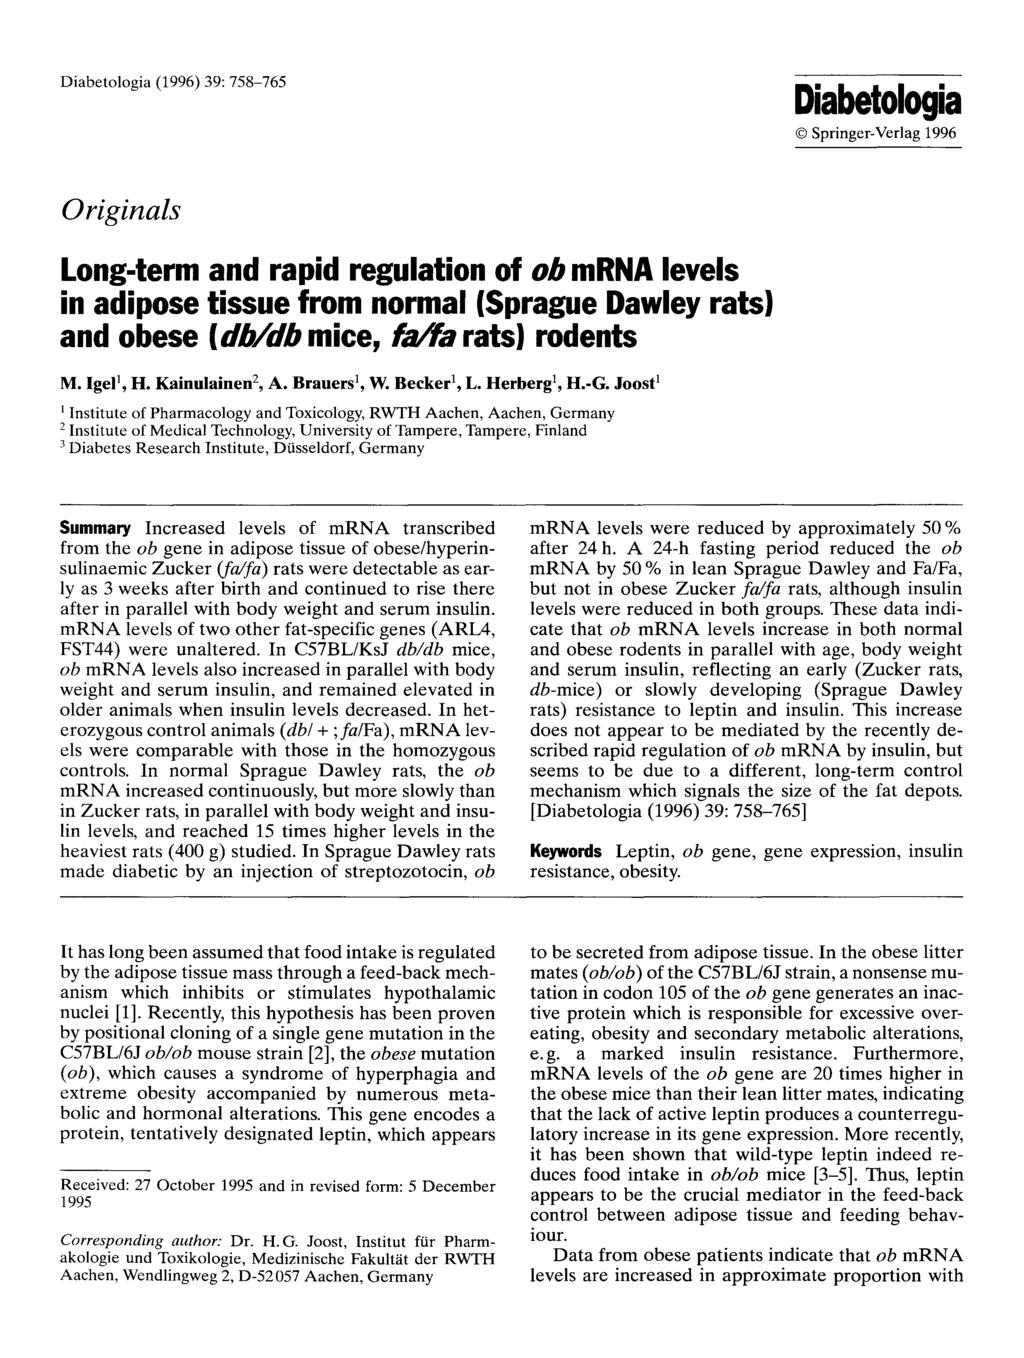 Dabetologa (1996) 39:758-765 Dabetologa 9 Sprnger-Verlag1996 Orgnals Long-term and rapd regulaton of ob mrna levels n adpose tssue from normal (Sprague Dawley rats) and obese (db/db mce, fa/fa rats)